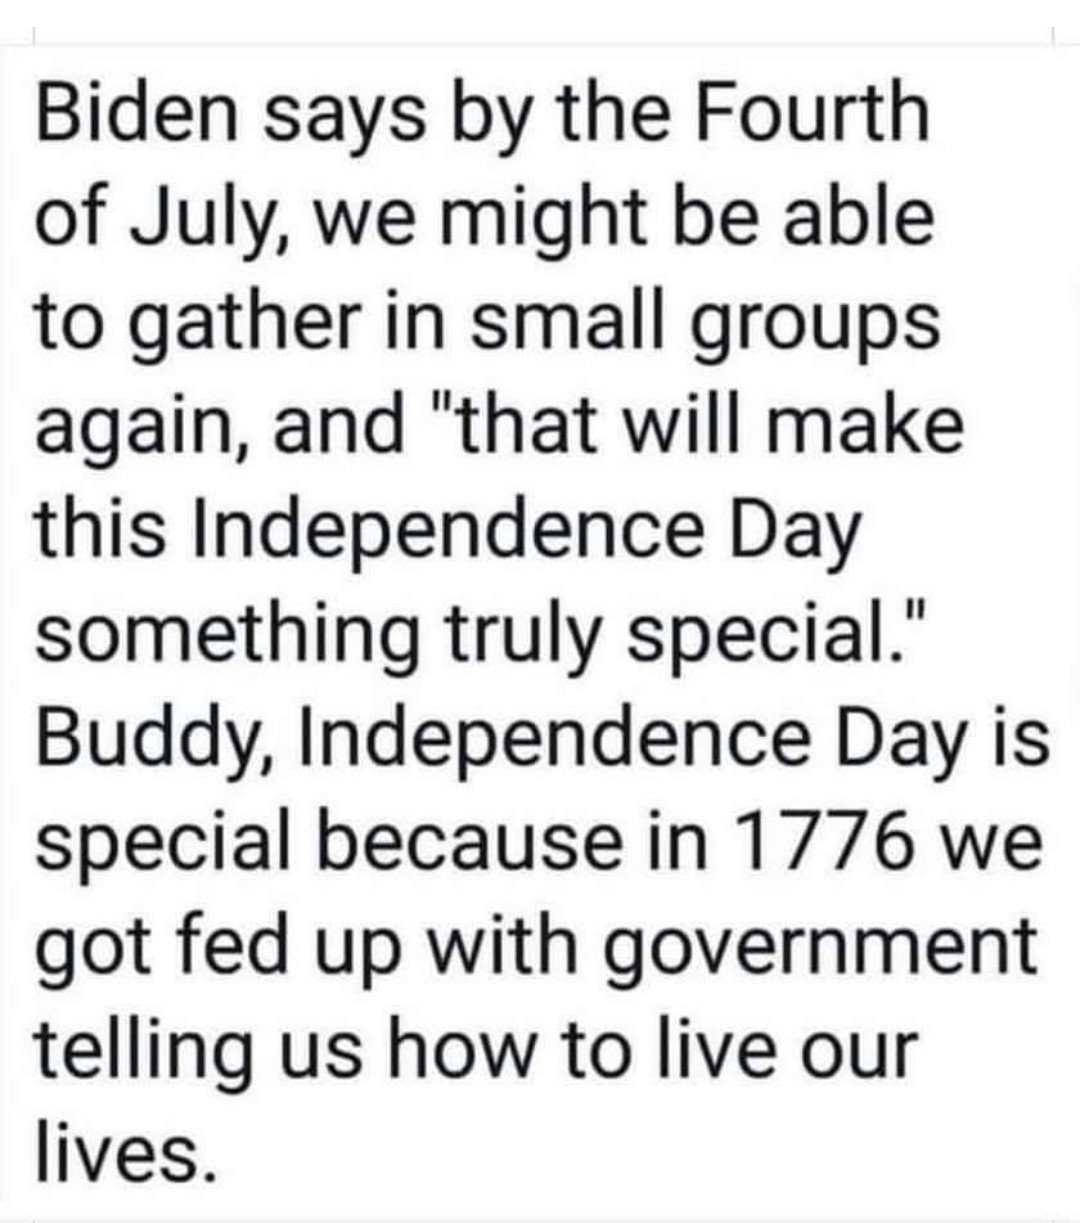 Biden on July 4 Covid-19 Independence Day